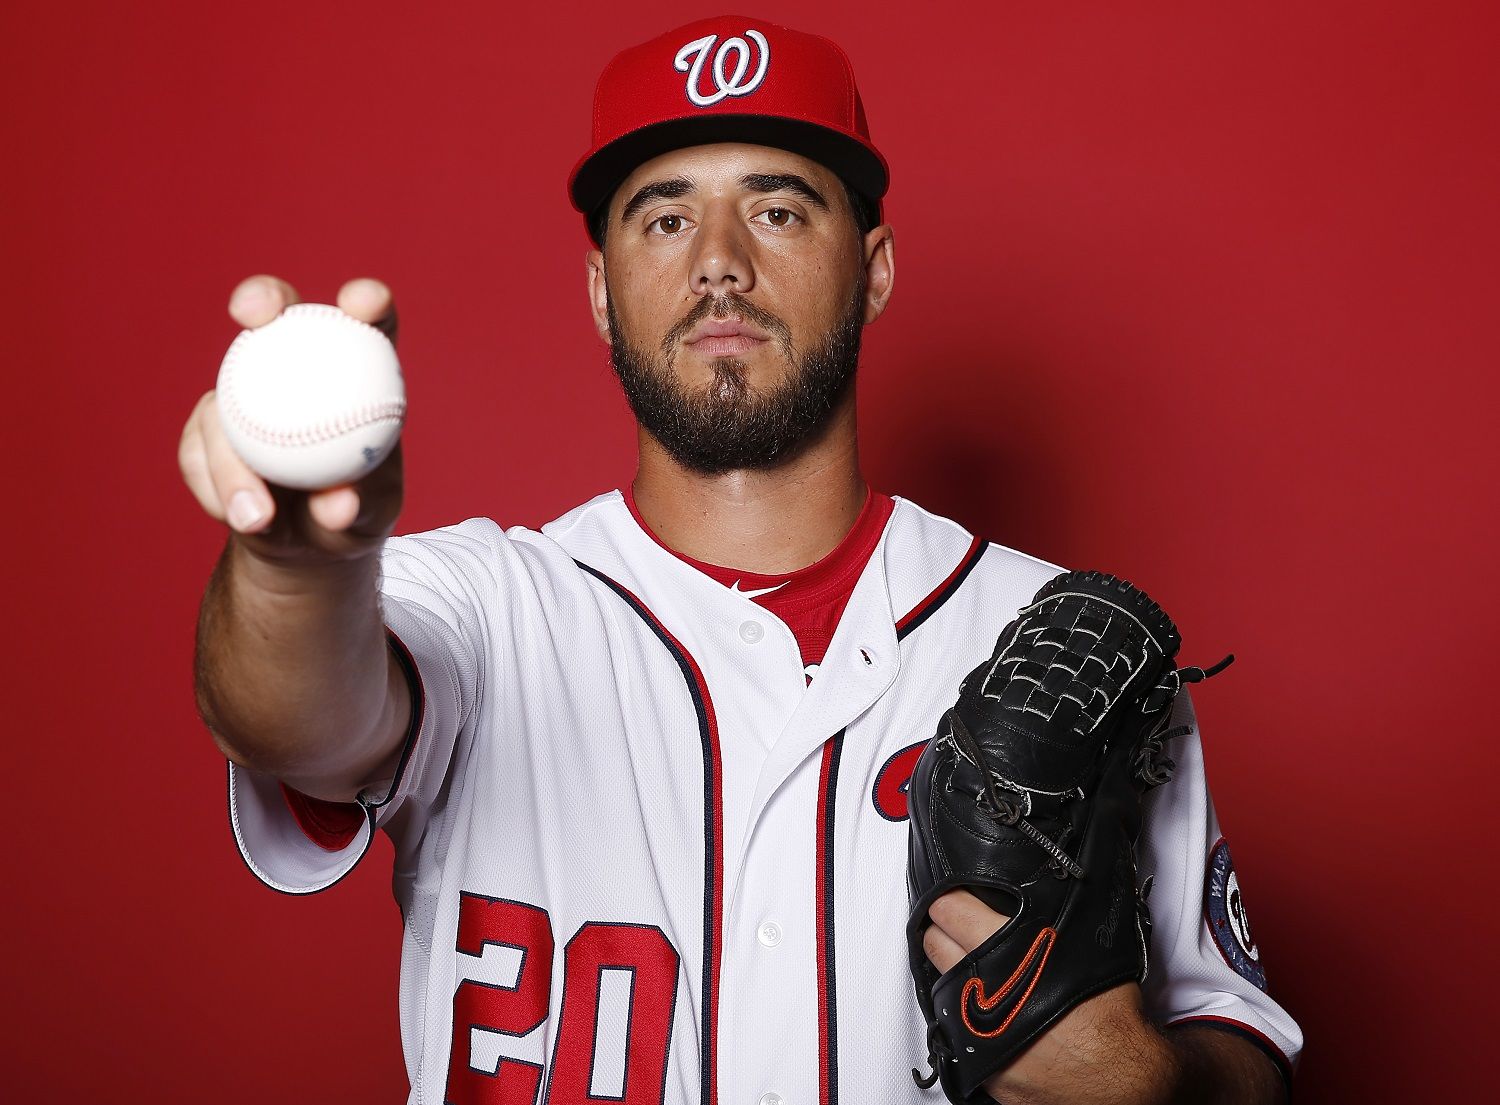 WEST PALM BEACH, FLORIDA - FEBRUARY 22:  Kyle Barraclough #20 of the Washington Nationals poses for a portrait on Photo Day at FITTEAM Ballpark of The Palm Beaches during on February 22, 2019 in West Palm Beach, Florida. (Photo by Michael Reaves/Getty Images)